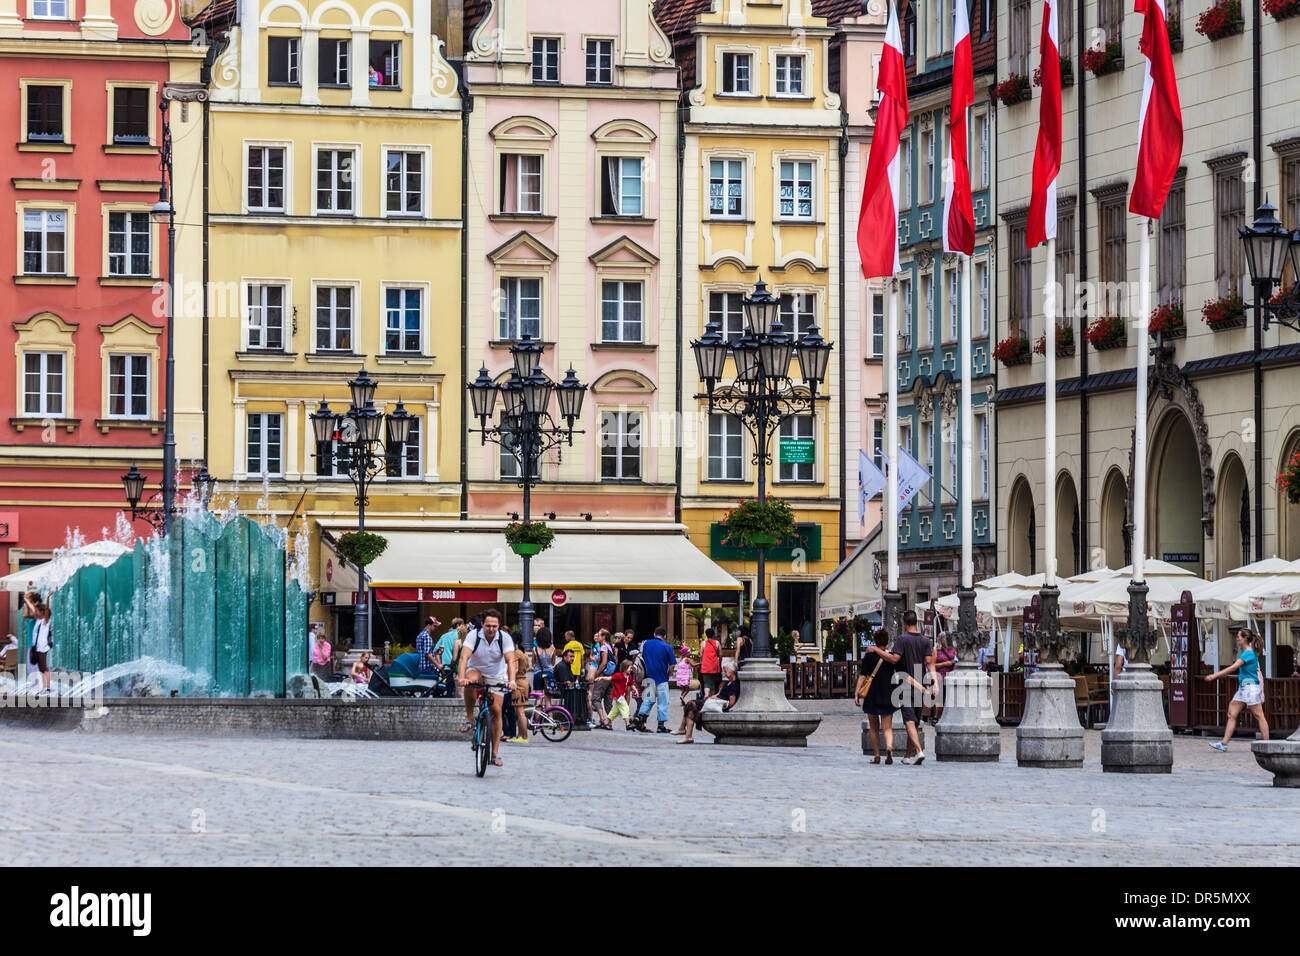 Wroclaw's old town Market Square or Rynek. Stock Photo